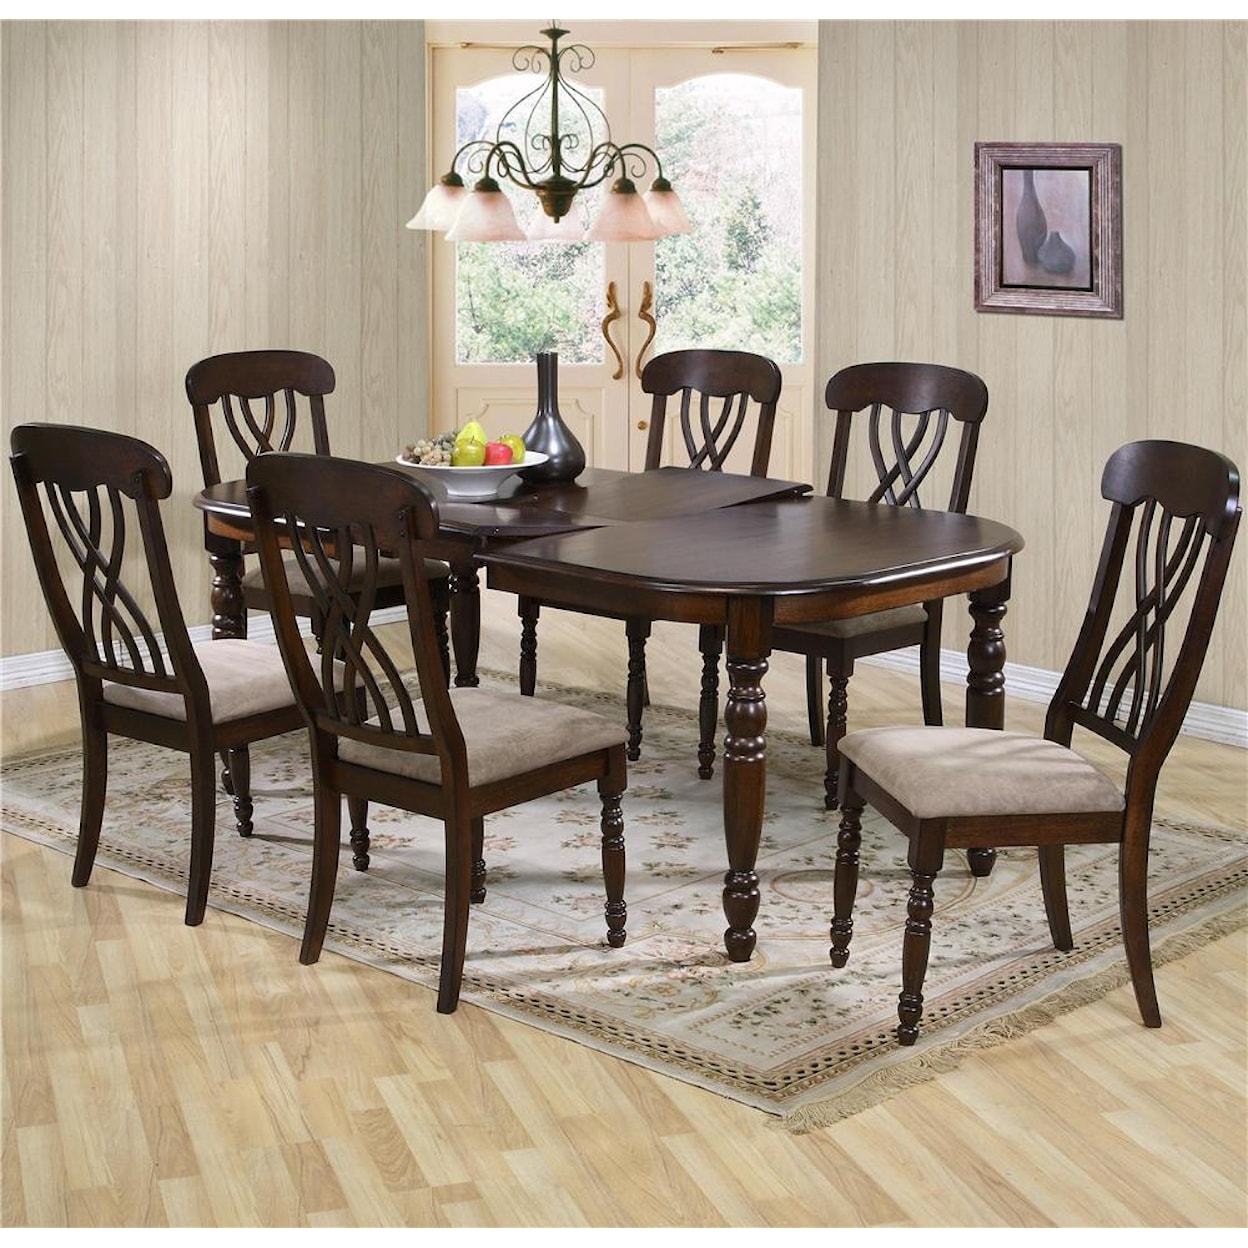 Primo International 9308 Dining Table and Chair Set